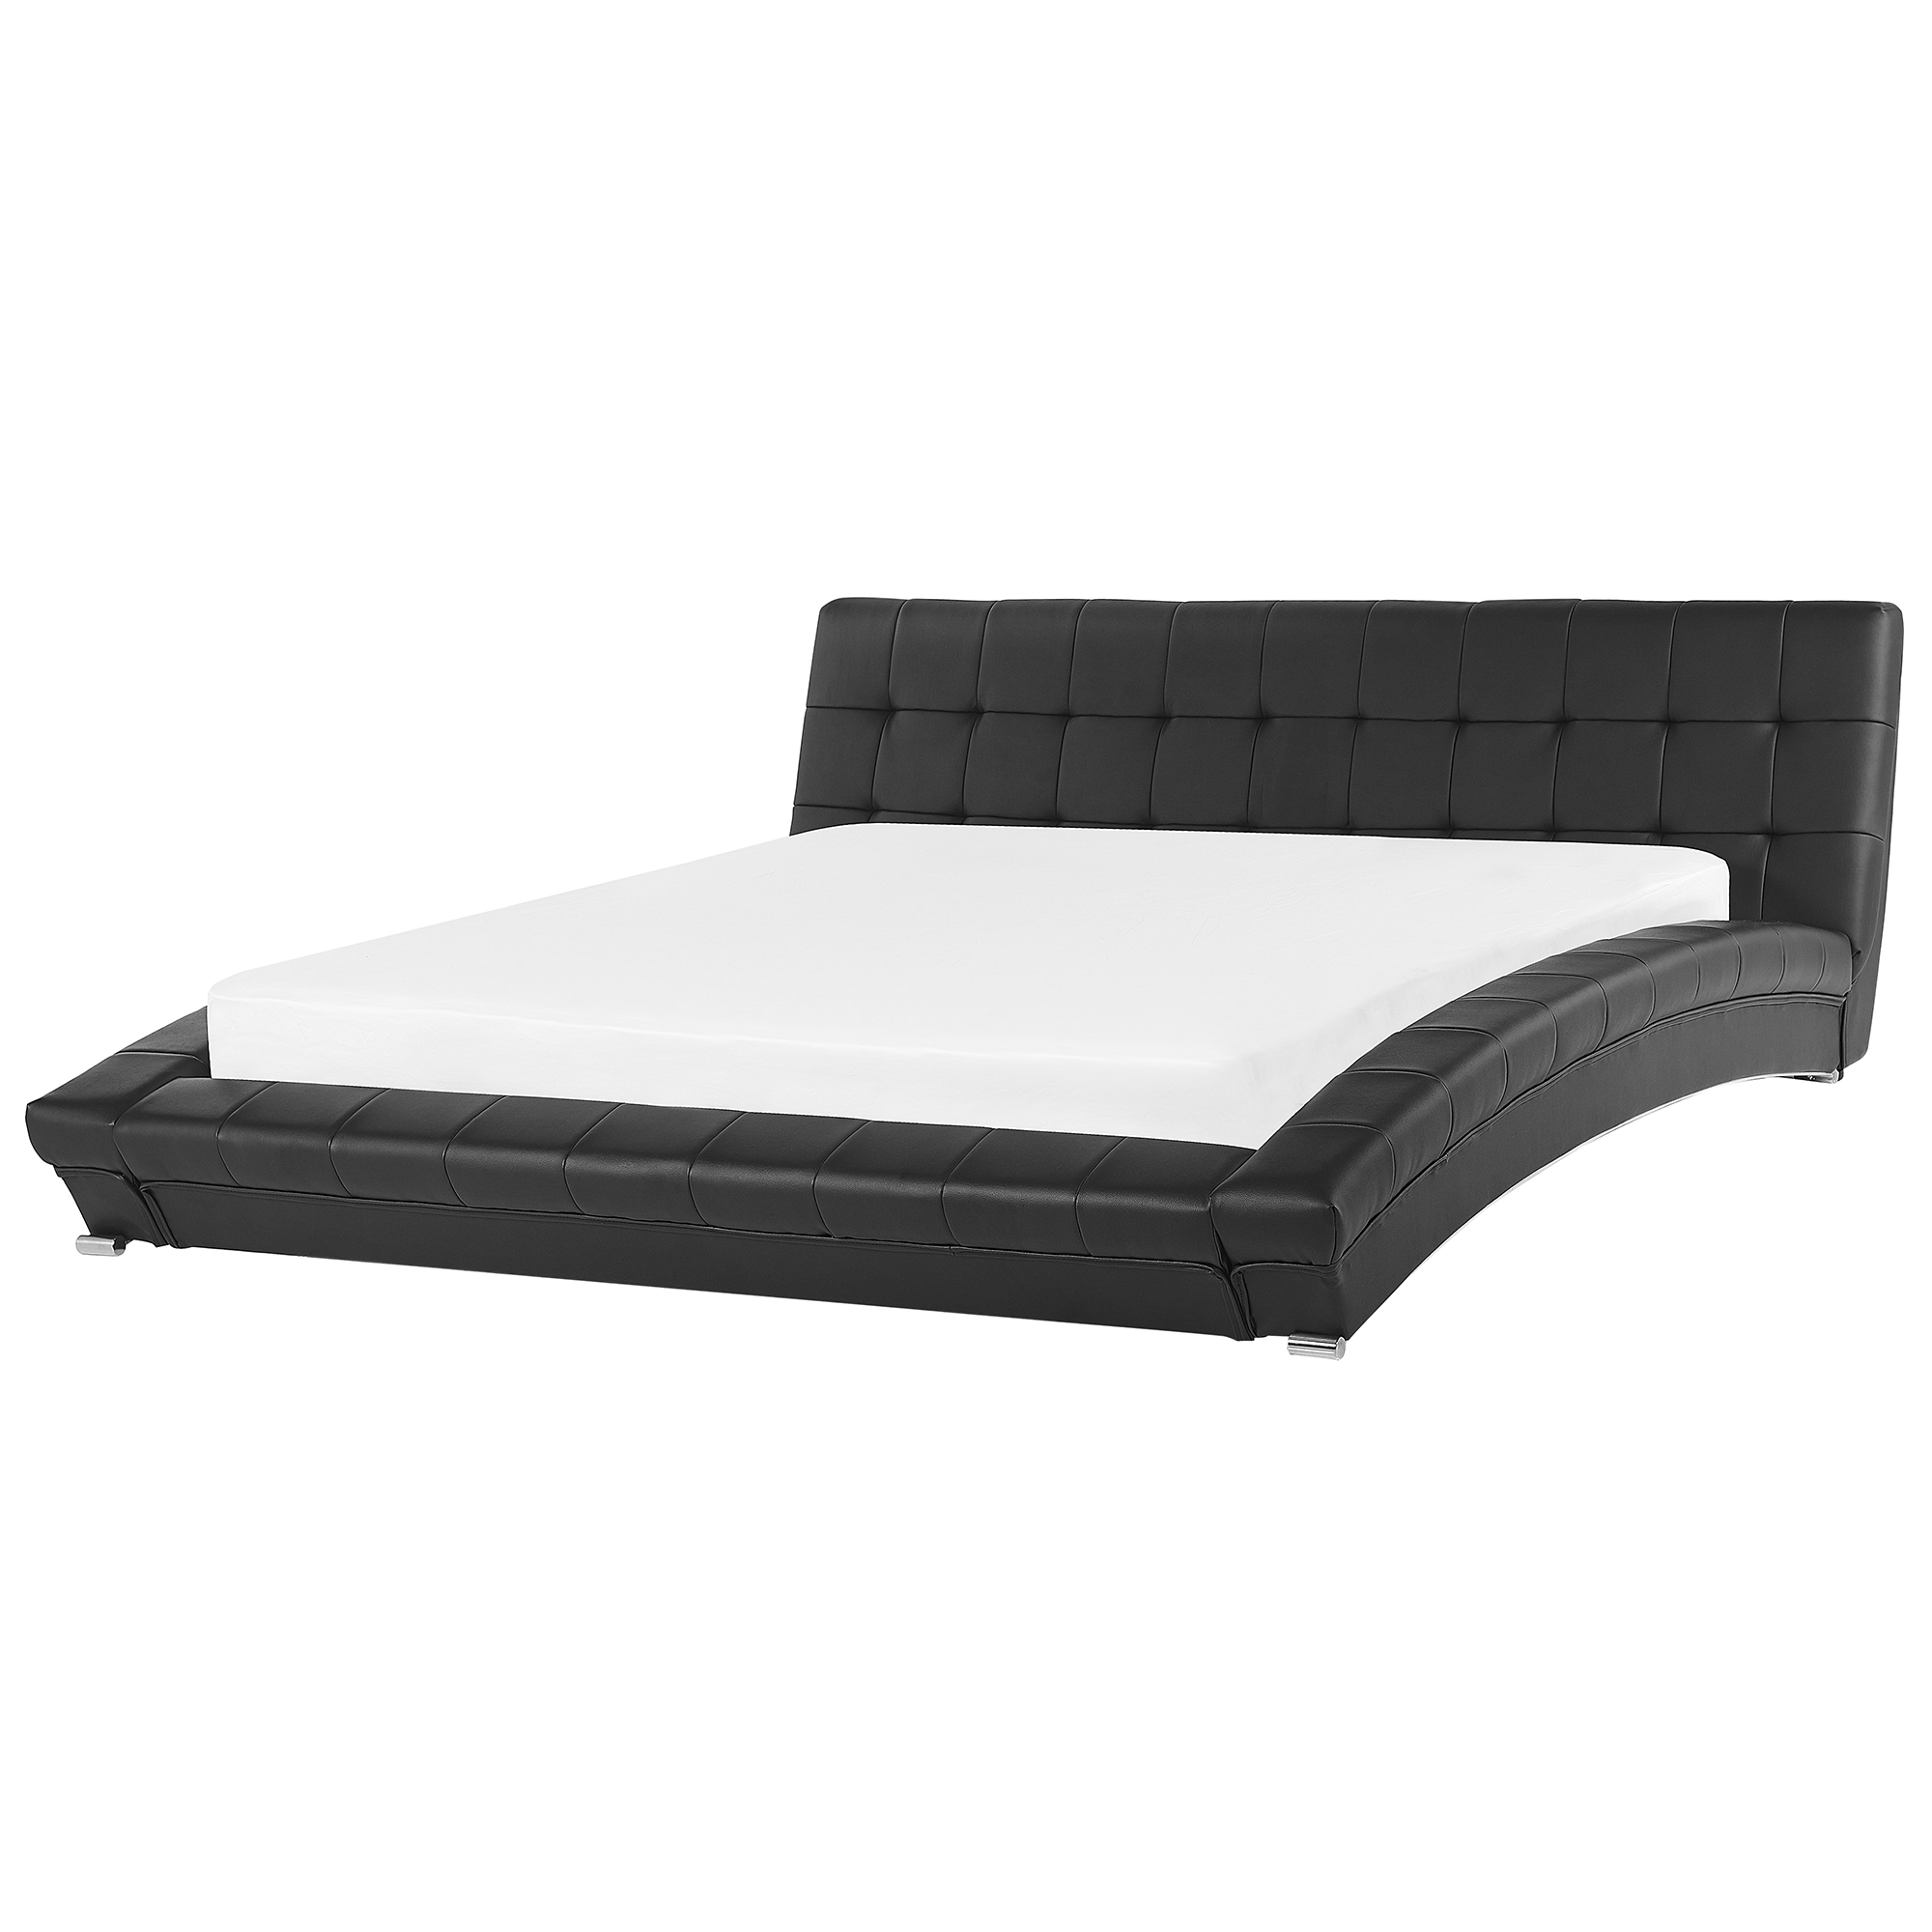 Beliani Platform Waterbed Black Genuine Leather Upholstered with Mattress and Accessories 6ft EU Super King Size Button Tufted Headboard